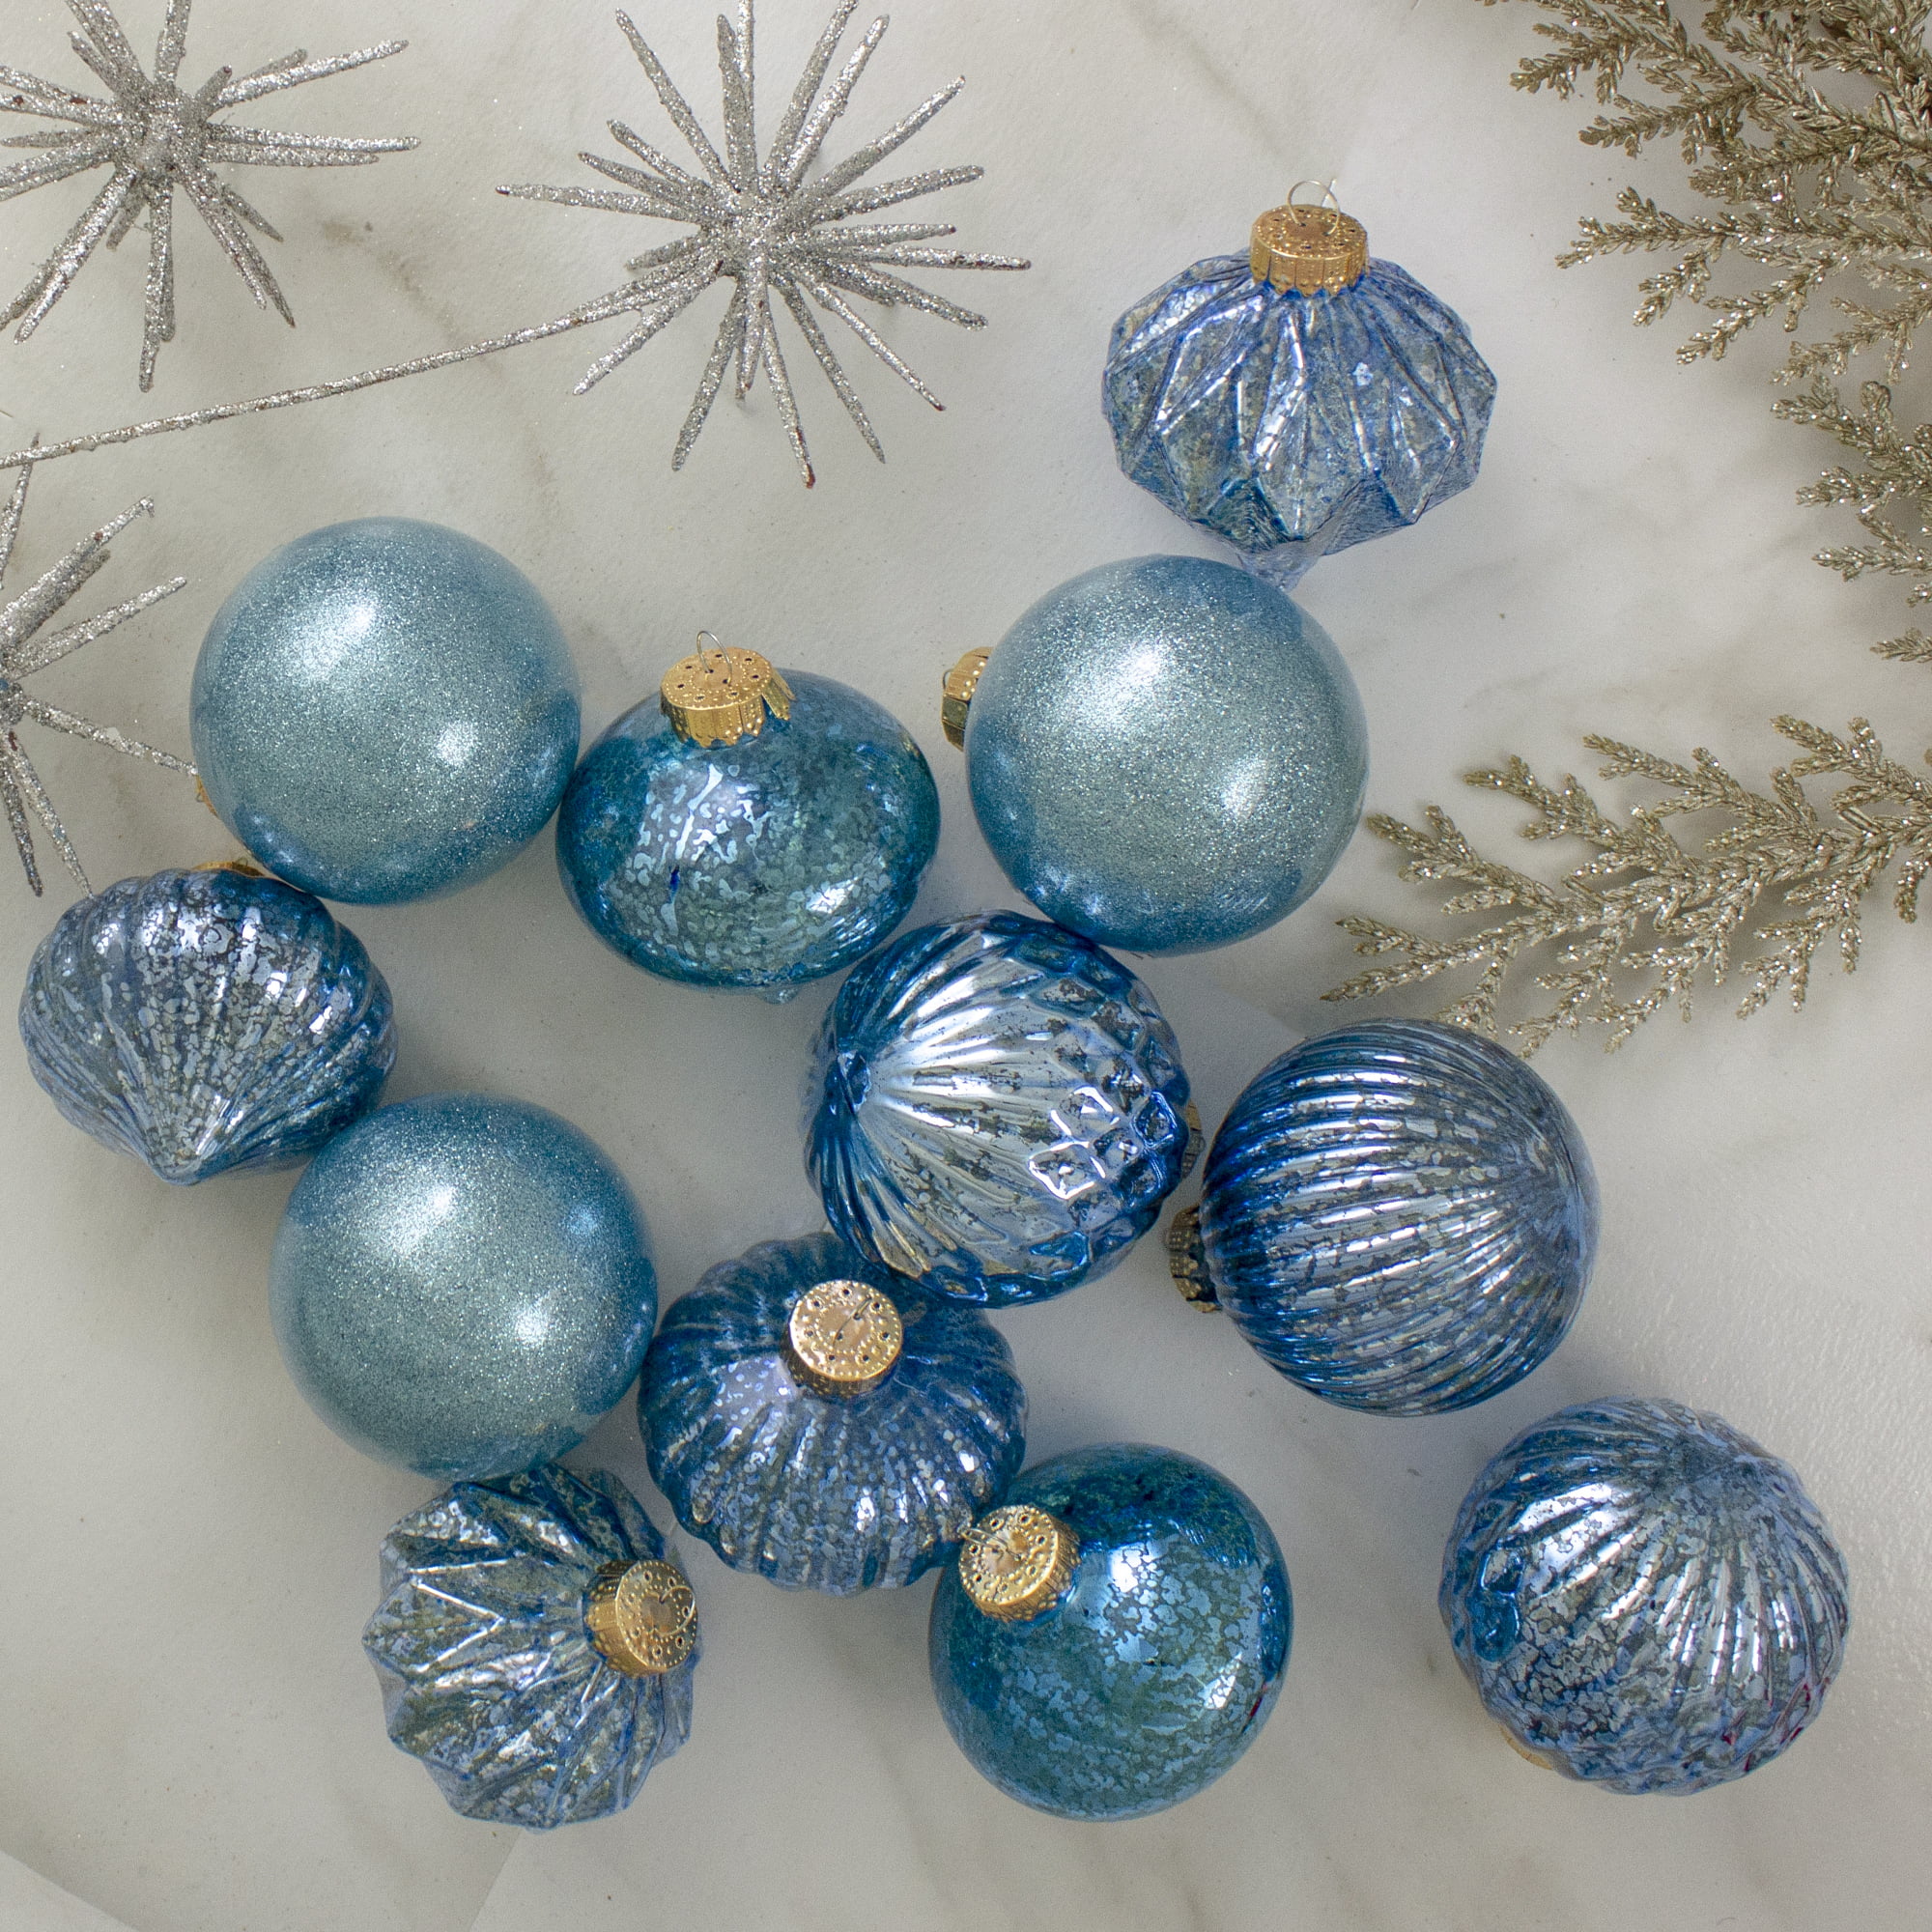 12ct Teal Blue 3-Finish Christmas Ornaments 3.75